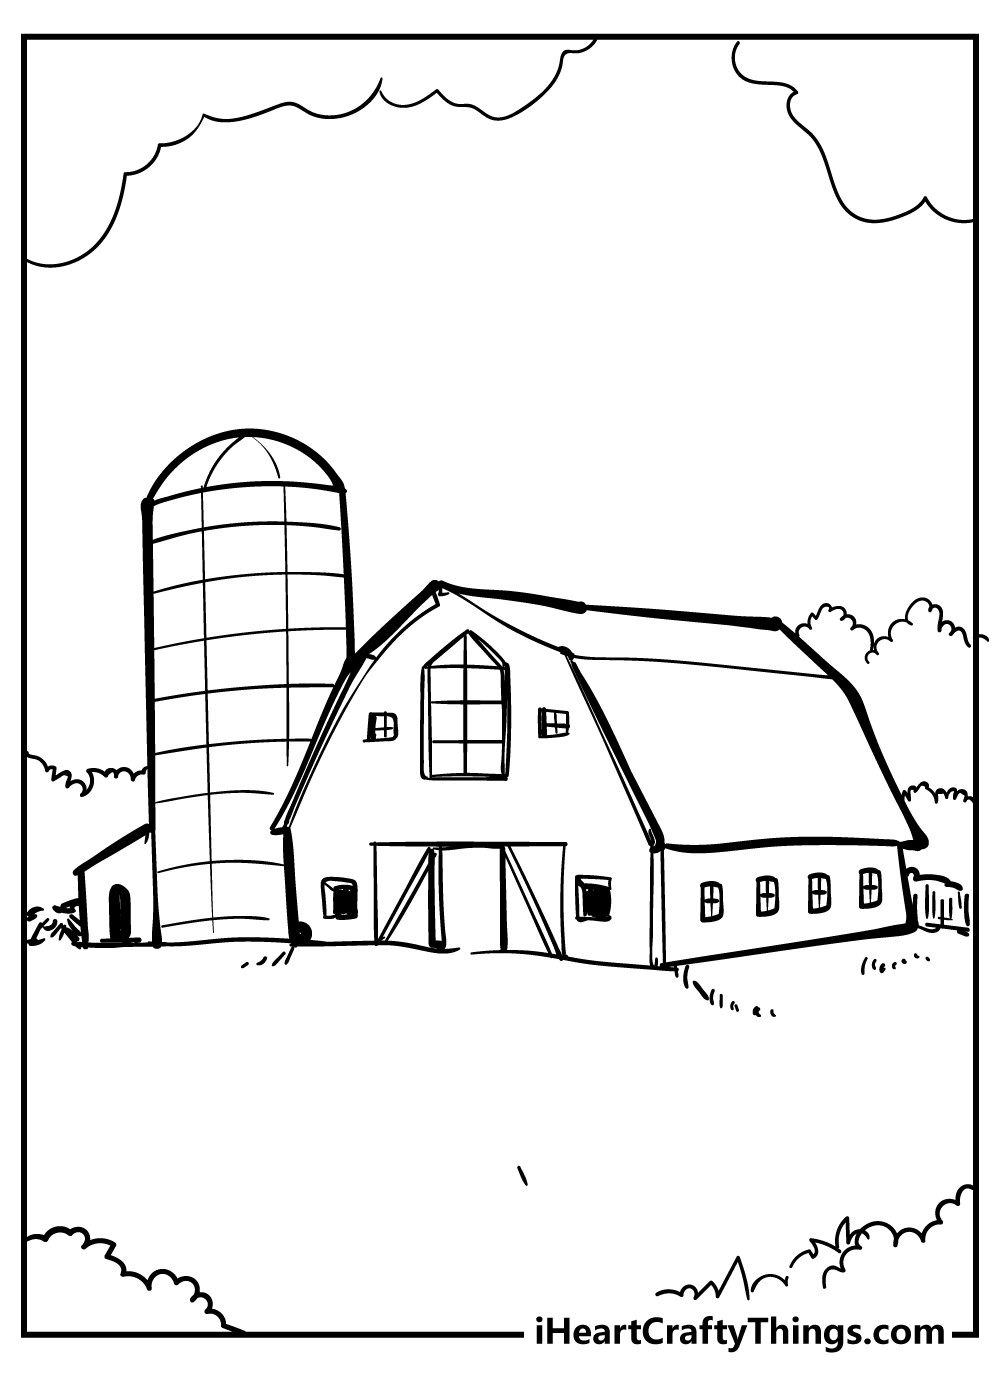 Barn Coloring Pages for preschoolers free printable